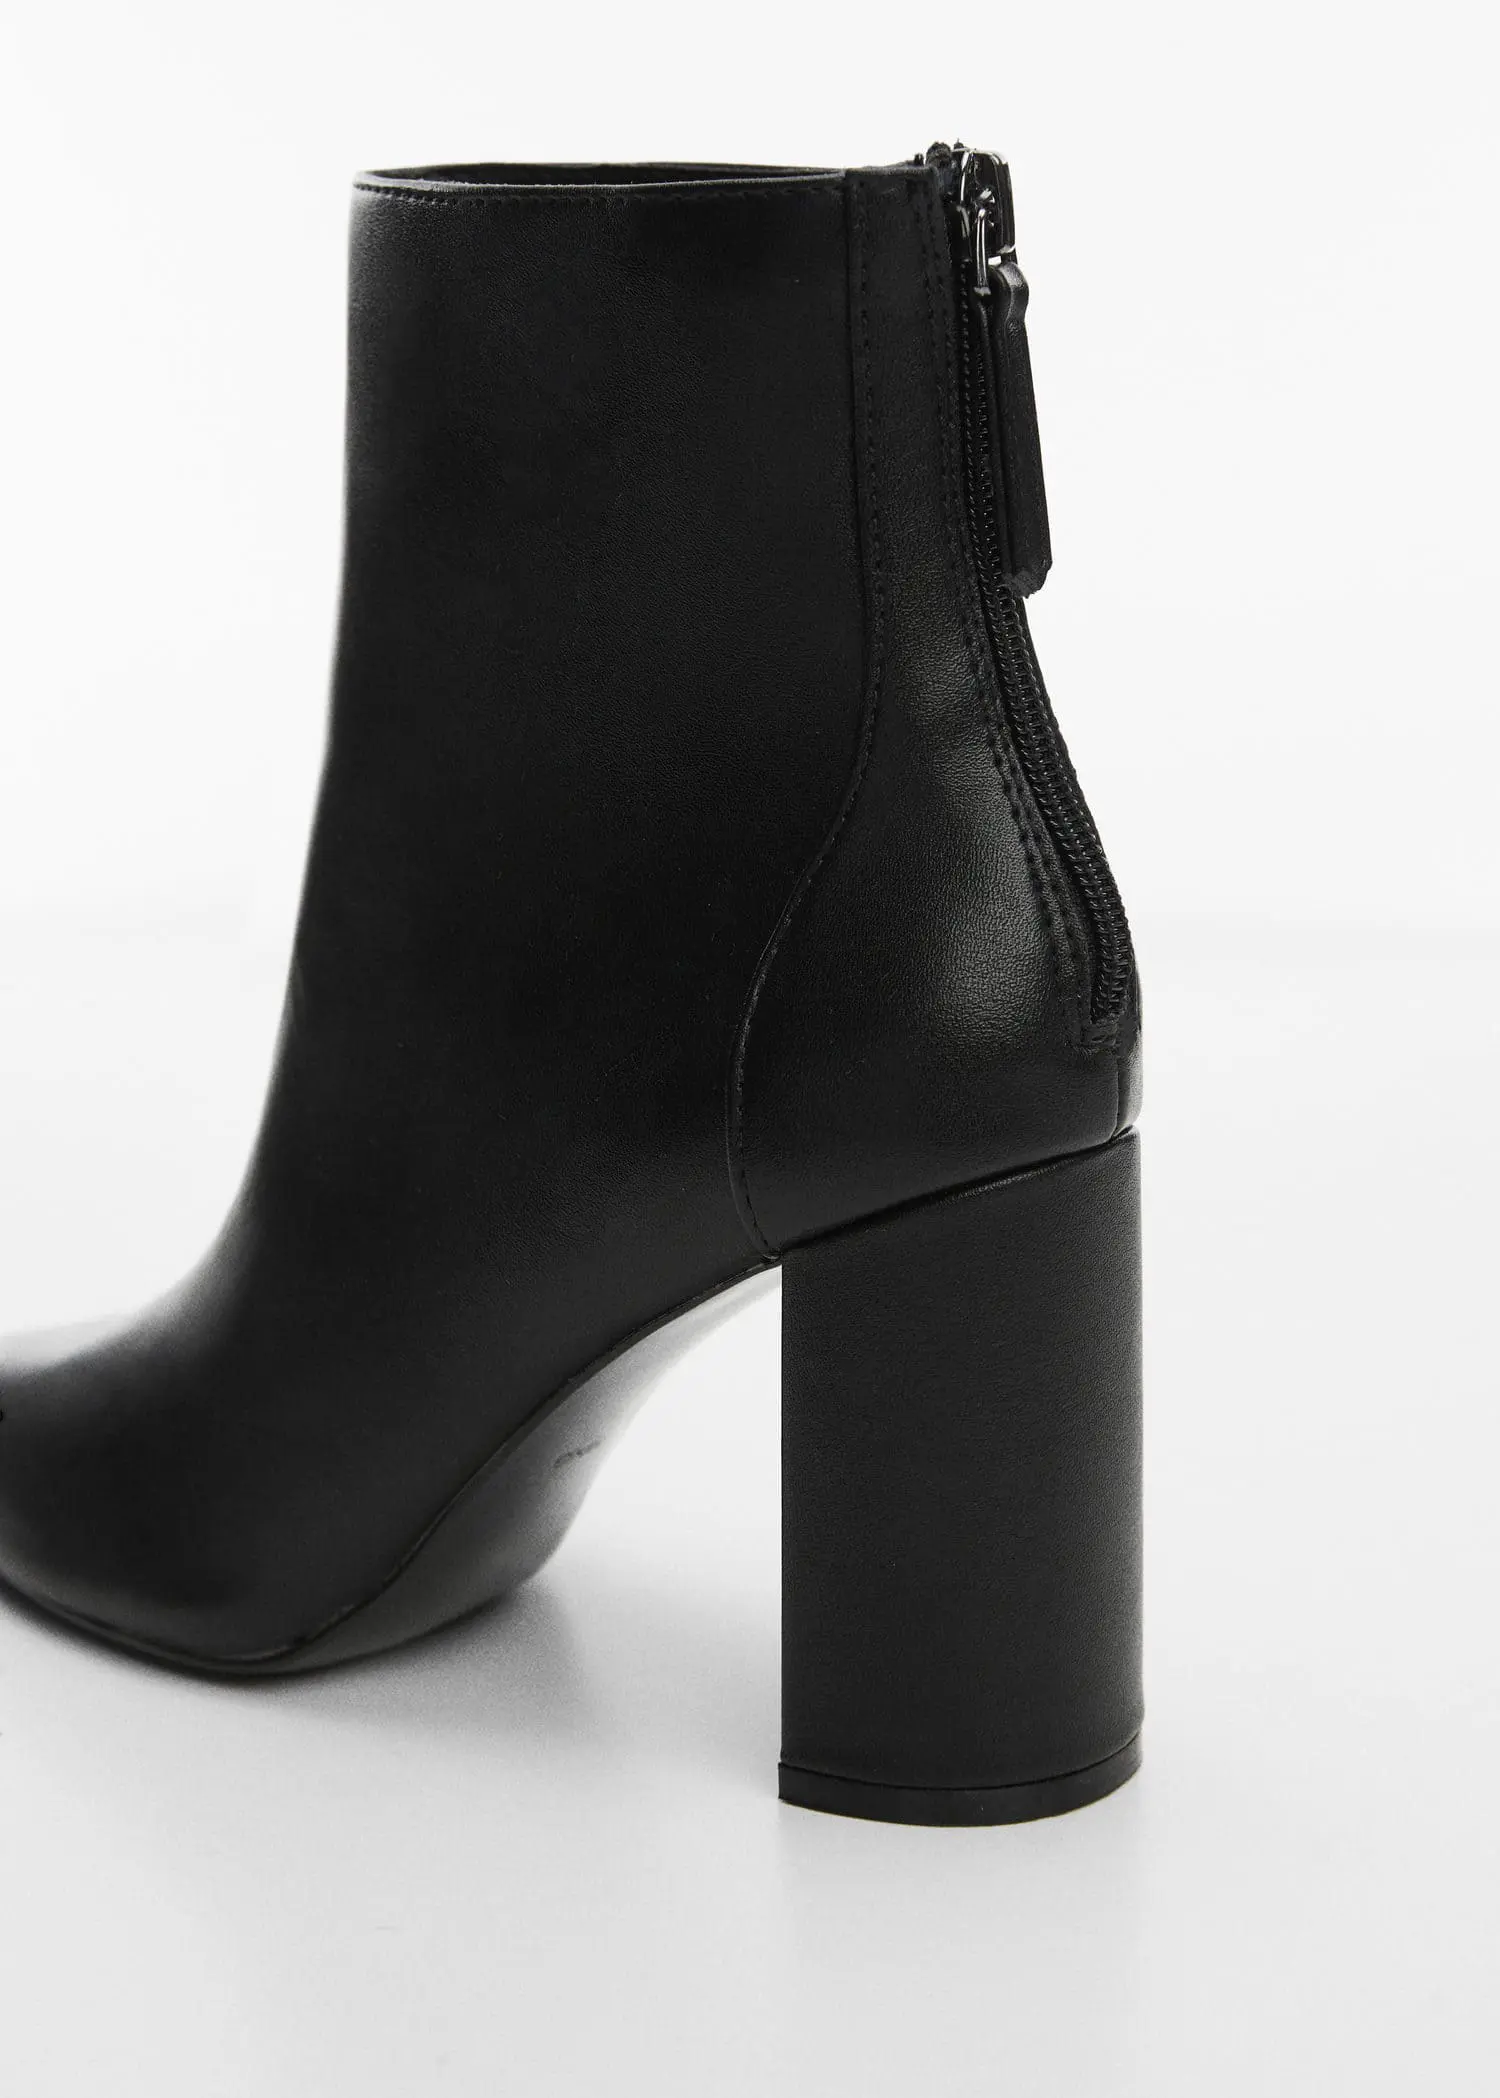 Mango Pointed-toe ankle boot swith zip closure. 3